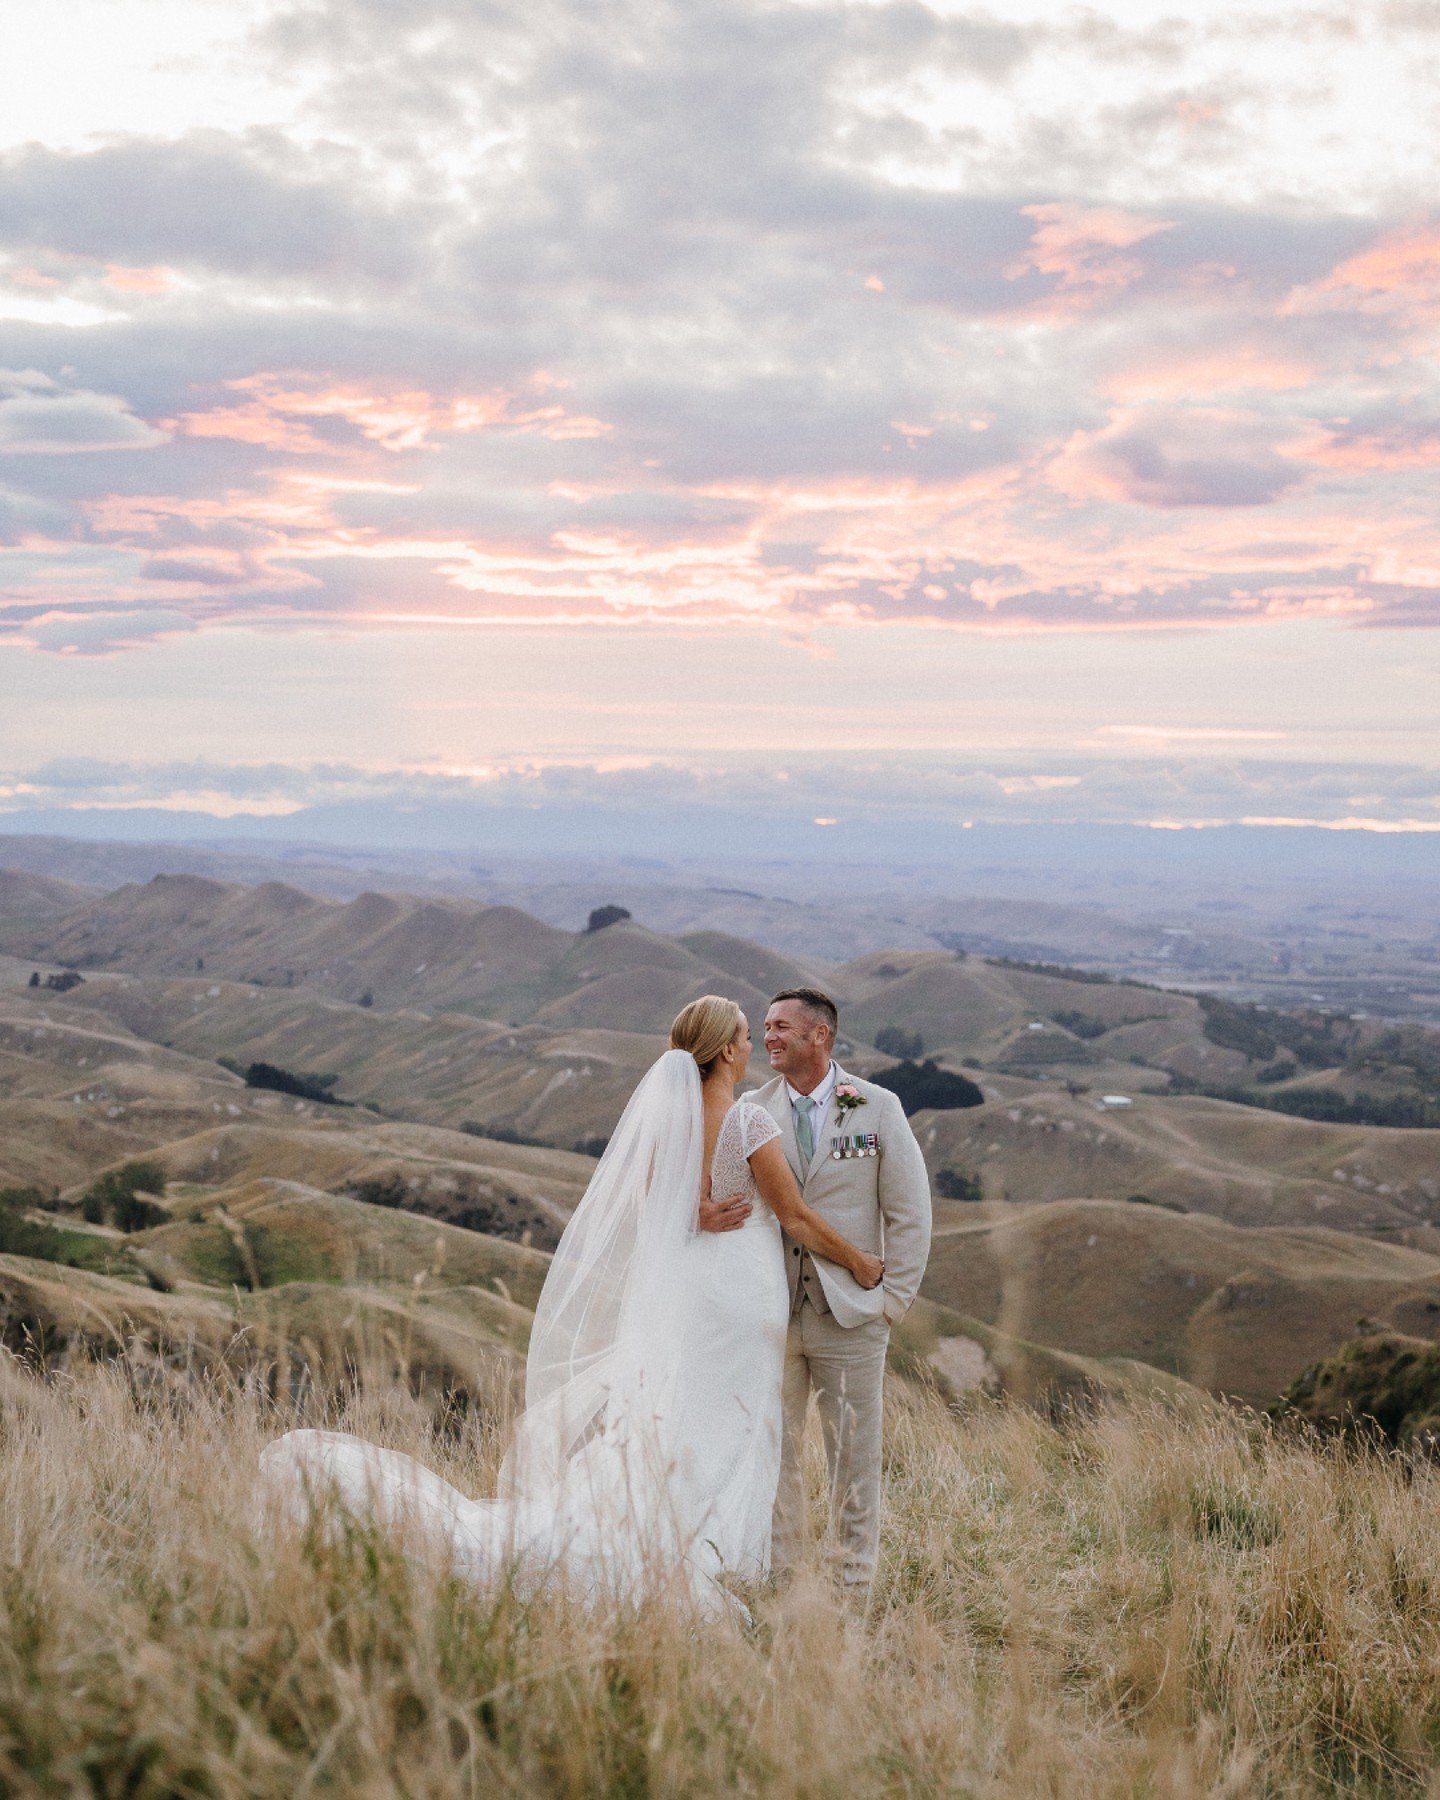 At the top of the world, with the one you love 🥰. 
Having your photos on Te Mata Peak at sunset on your wedding day is a bit of a rare treat (normally we're deep into entrees and speeches by this time), so I was stoked that Elizabeth &amp; Aaron wer